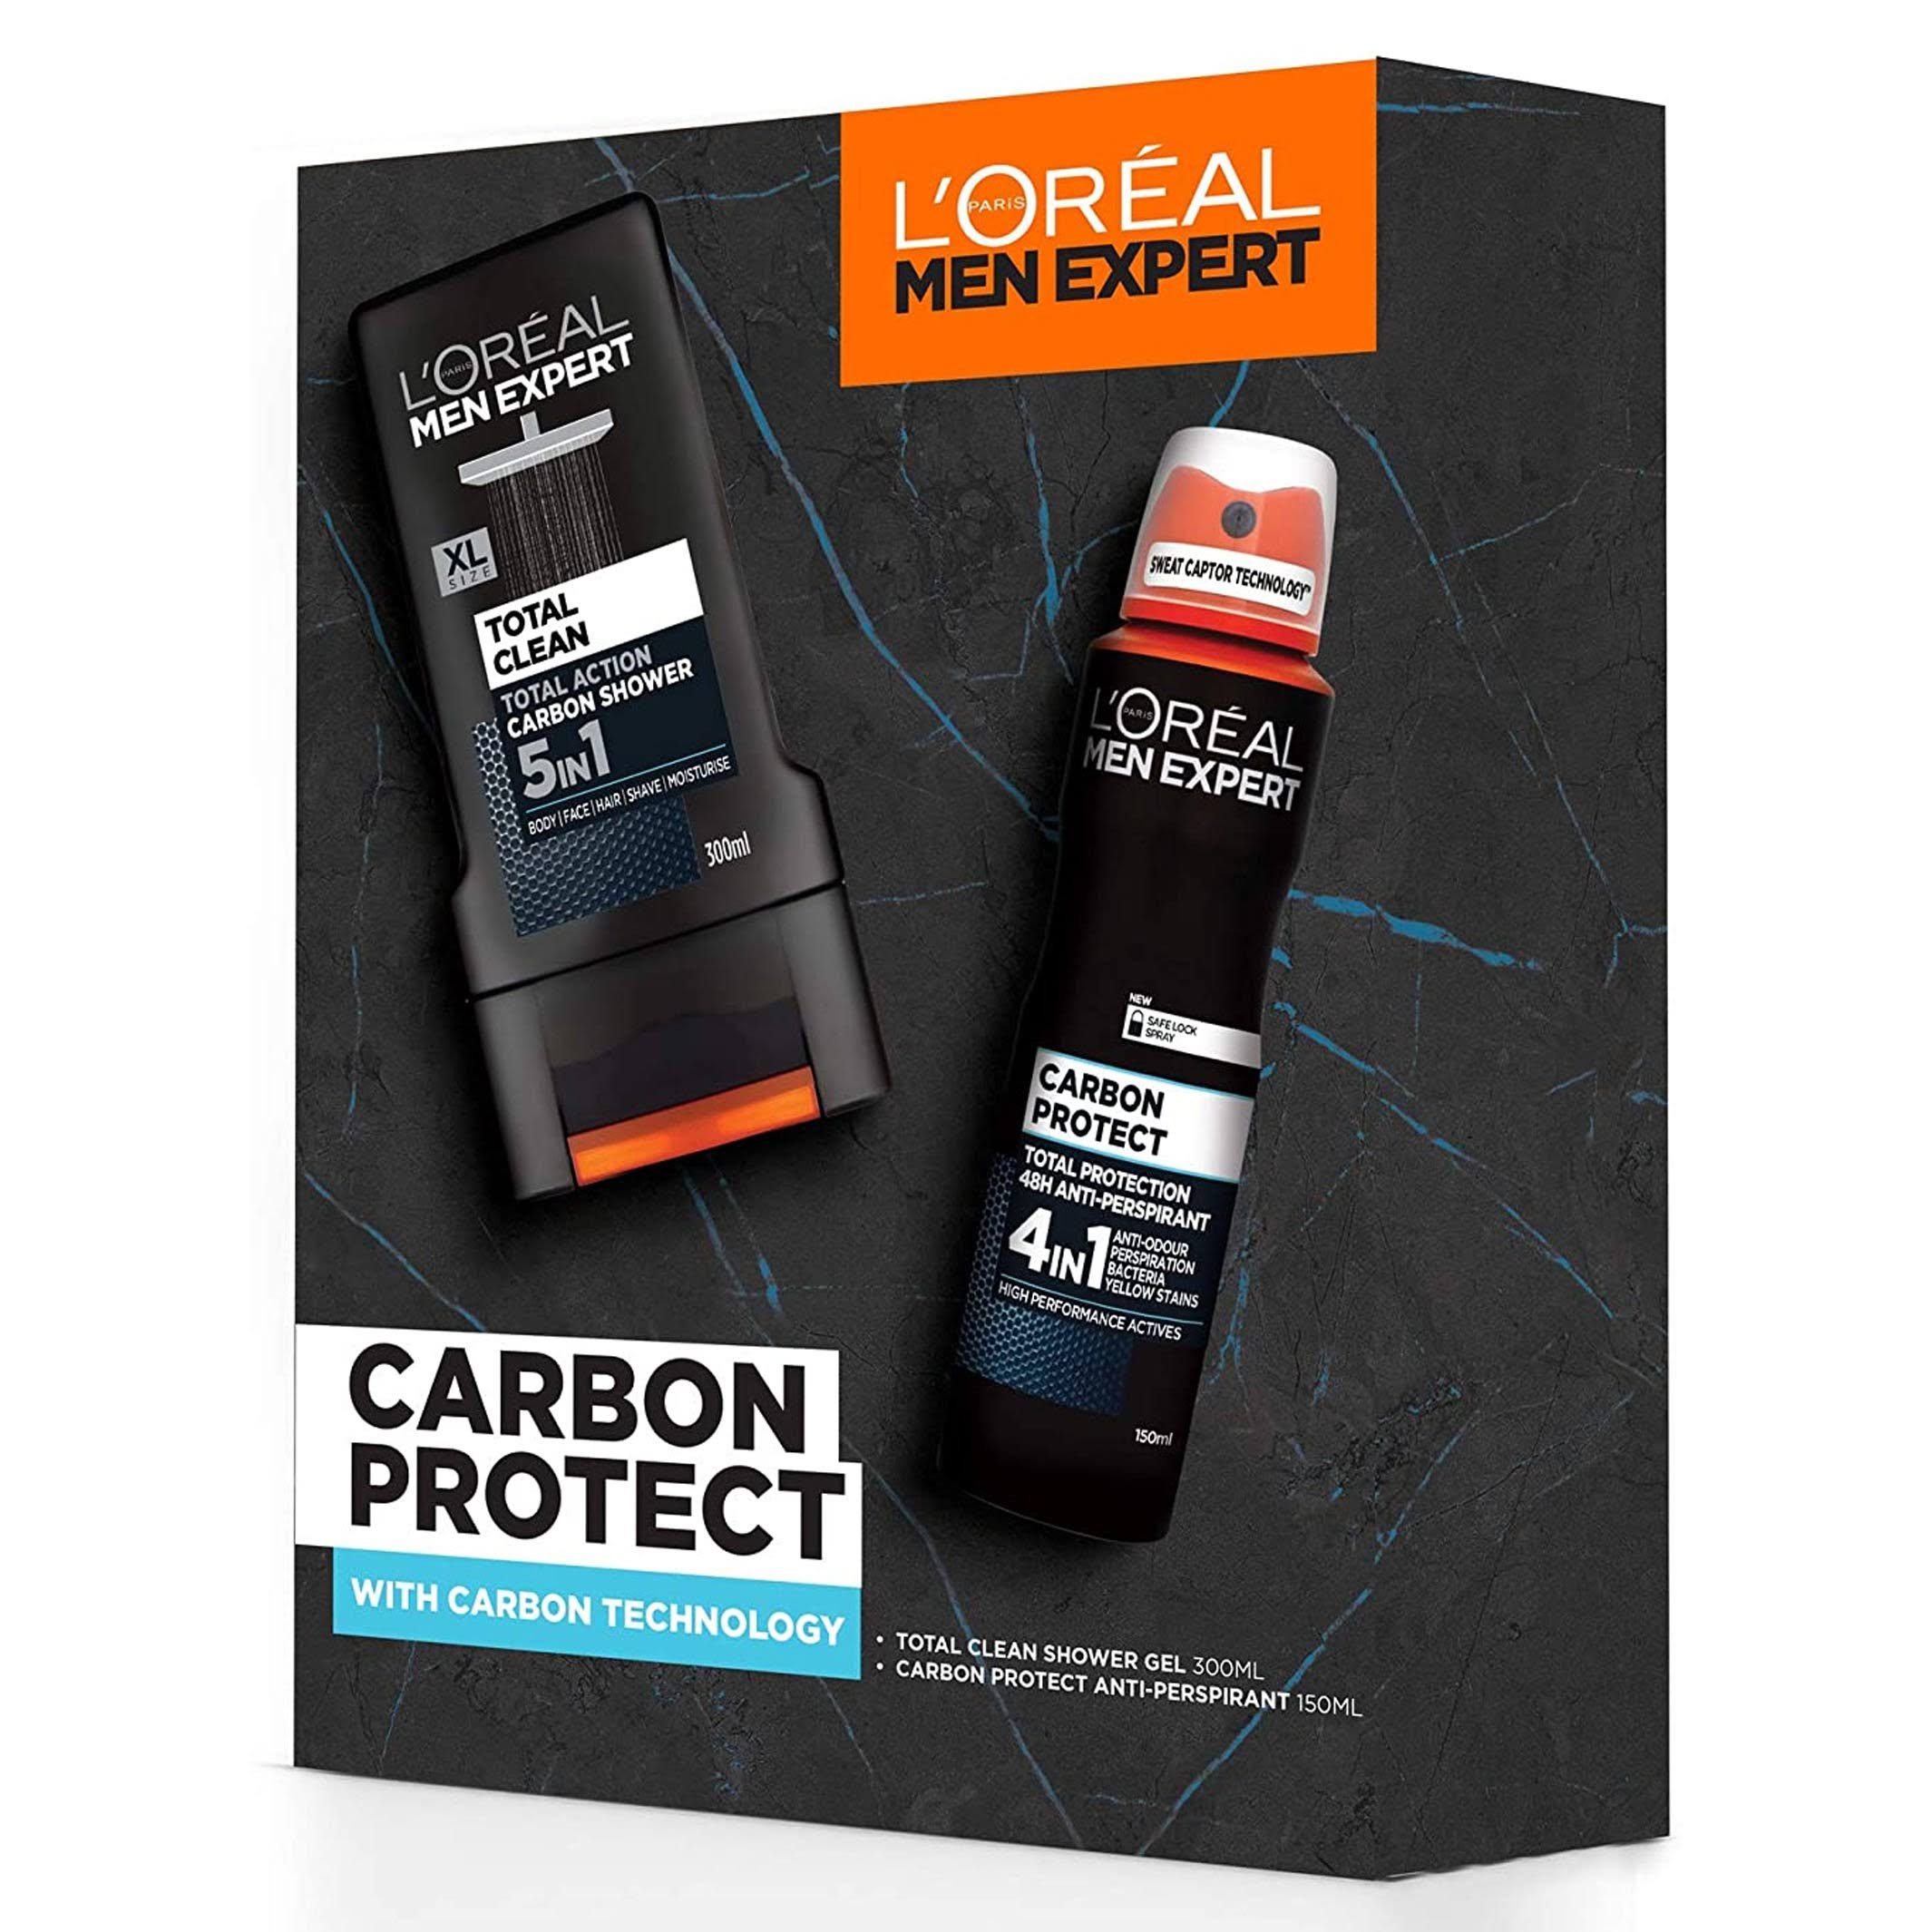 L'Oreal Men Expert Carbon Protect 2 Piece Gift Set for Him